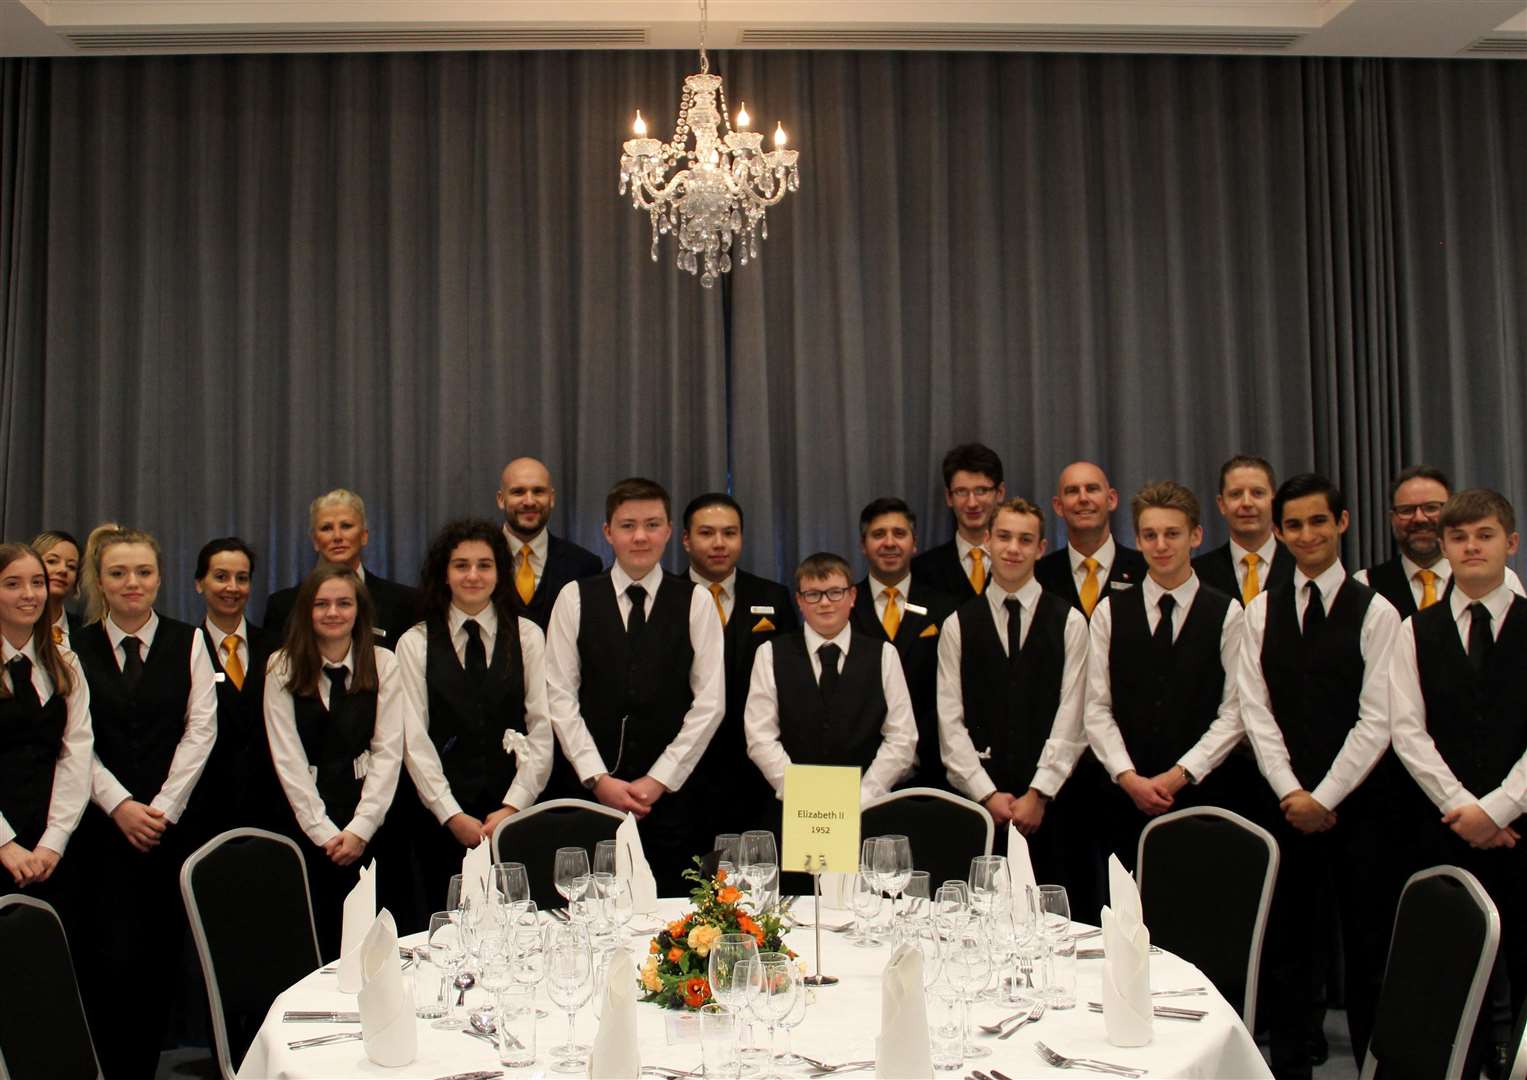 The next generation of butlers at Broadstairs College